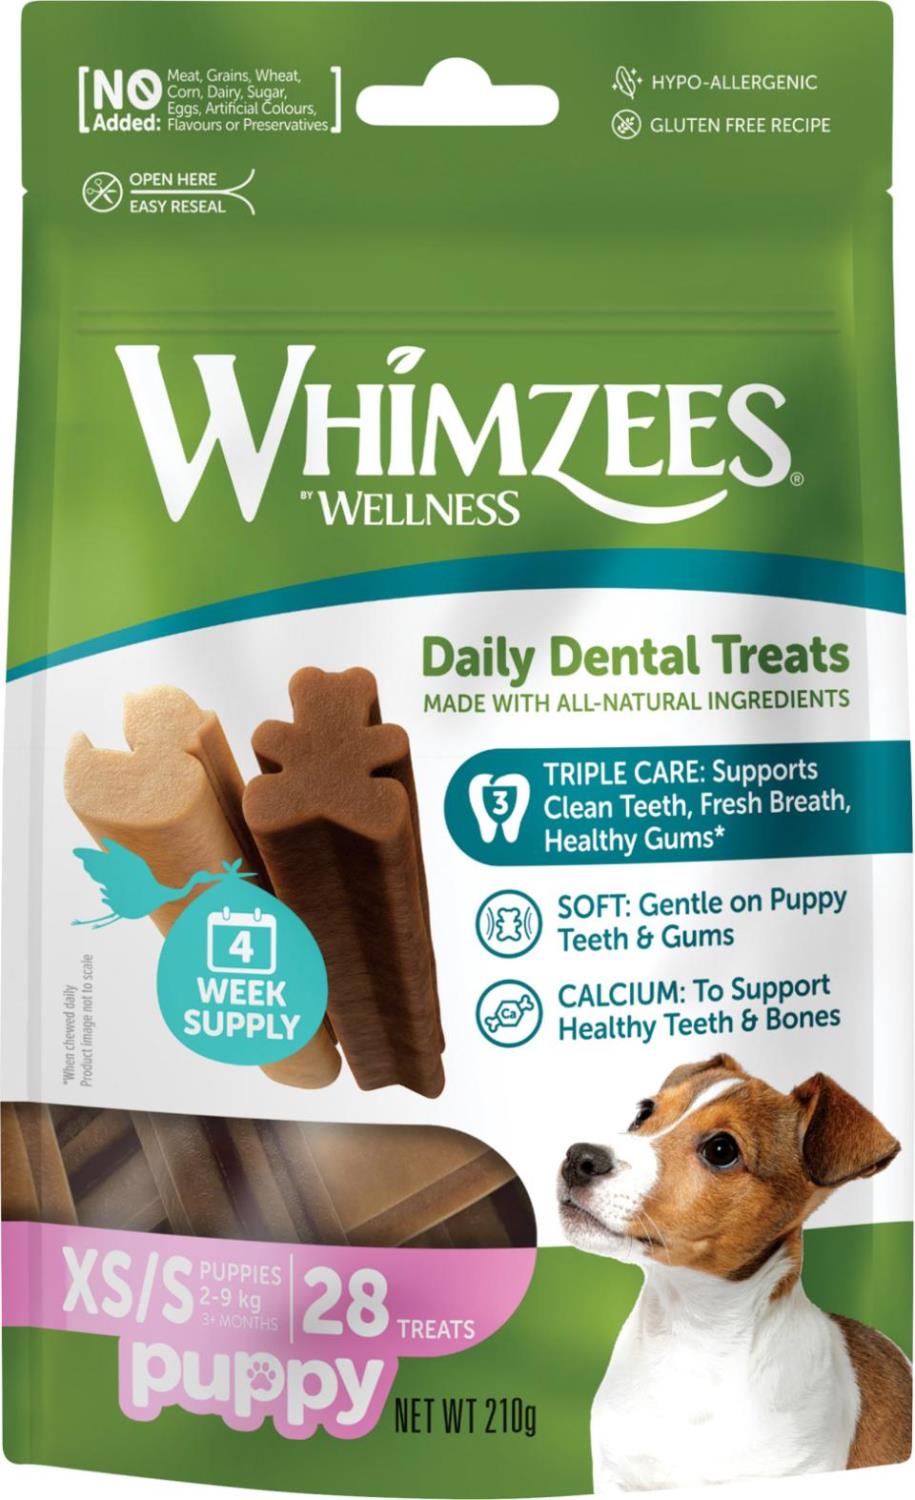 Whimzees Puppy Chew XS/S 210 g pose - 28 chew